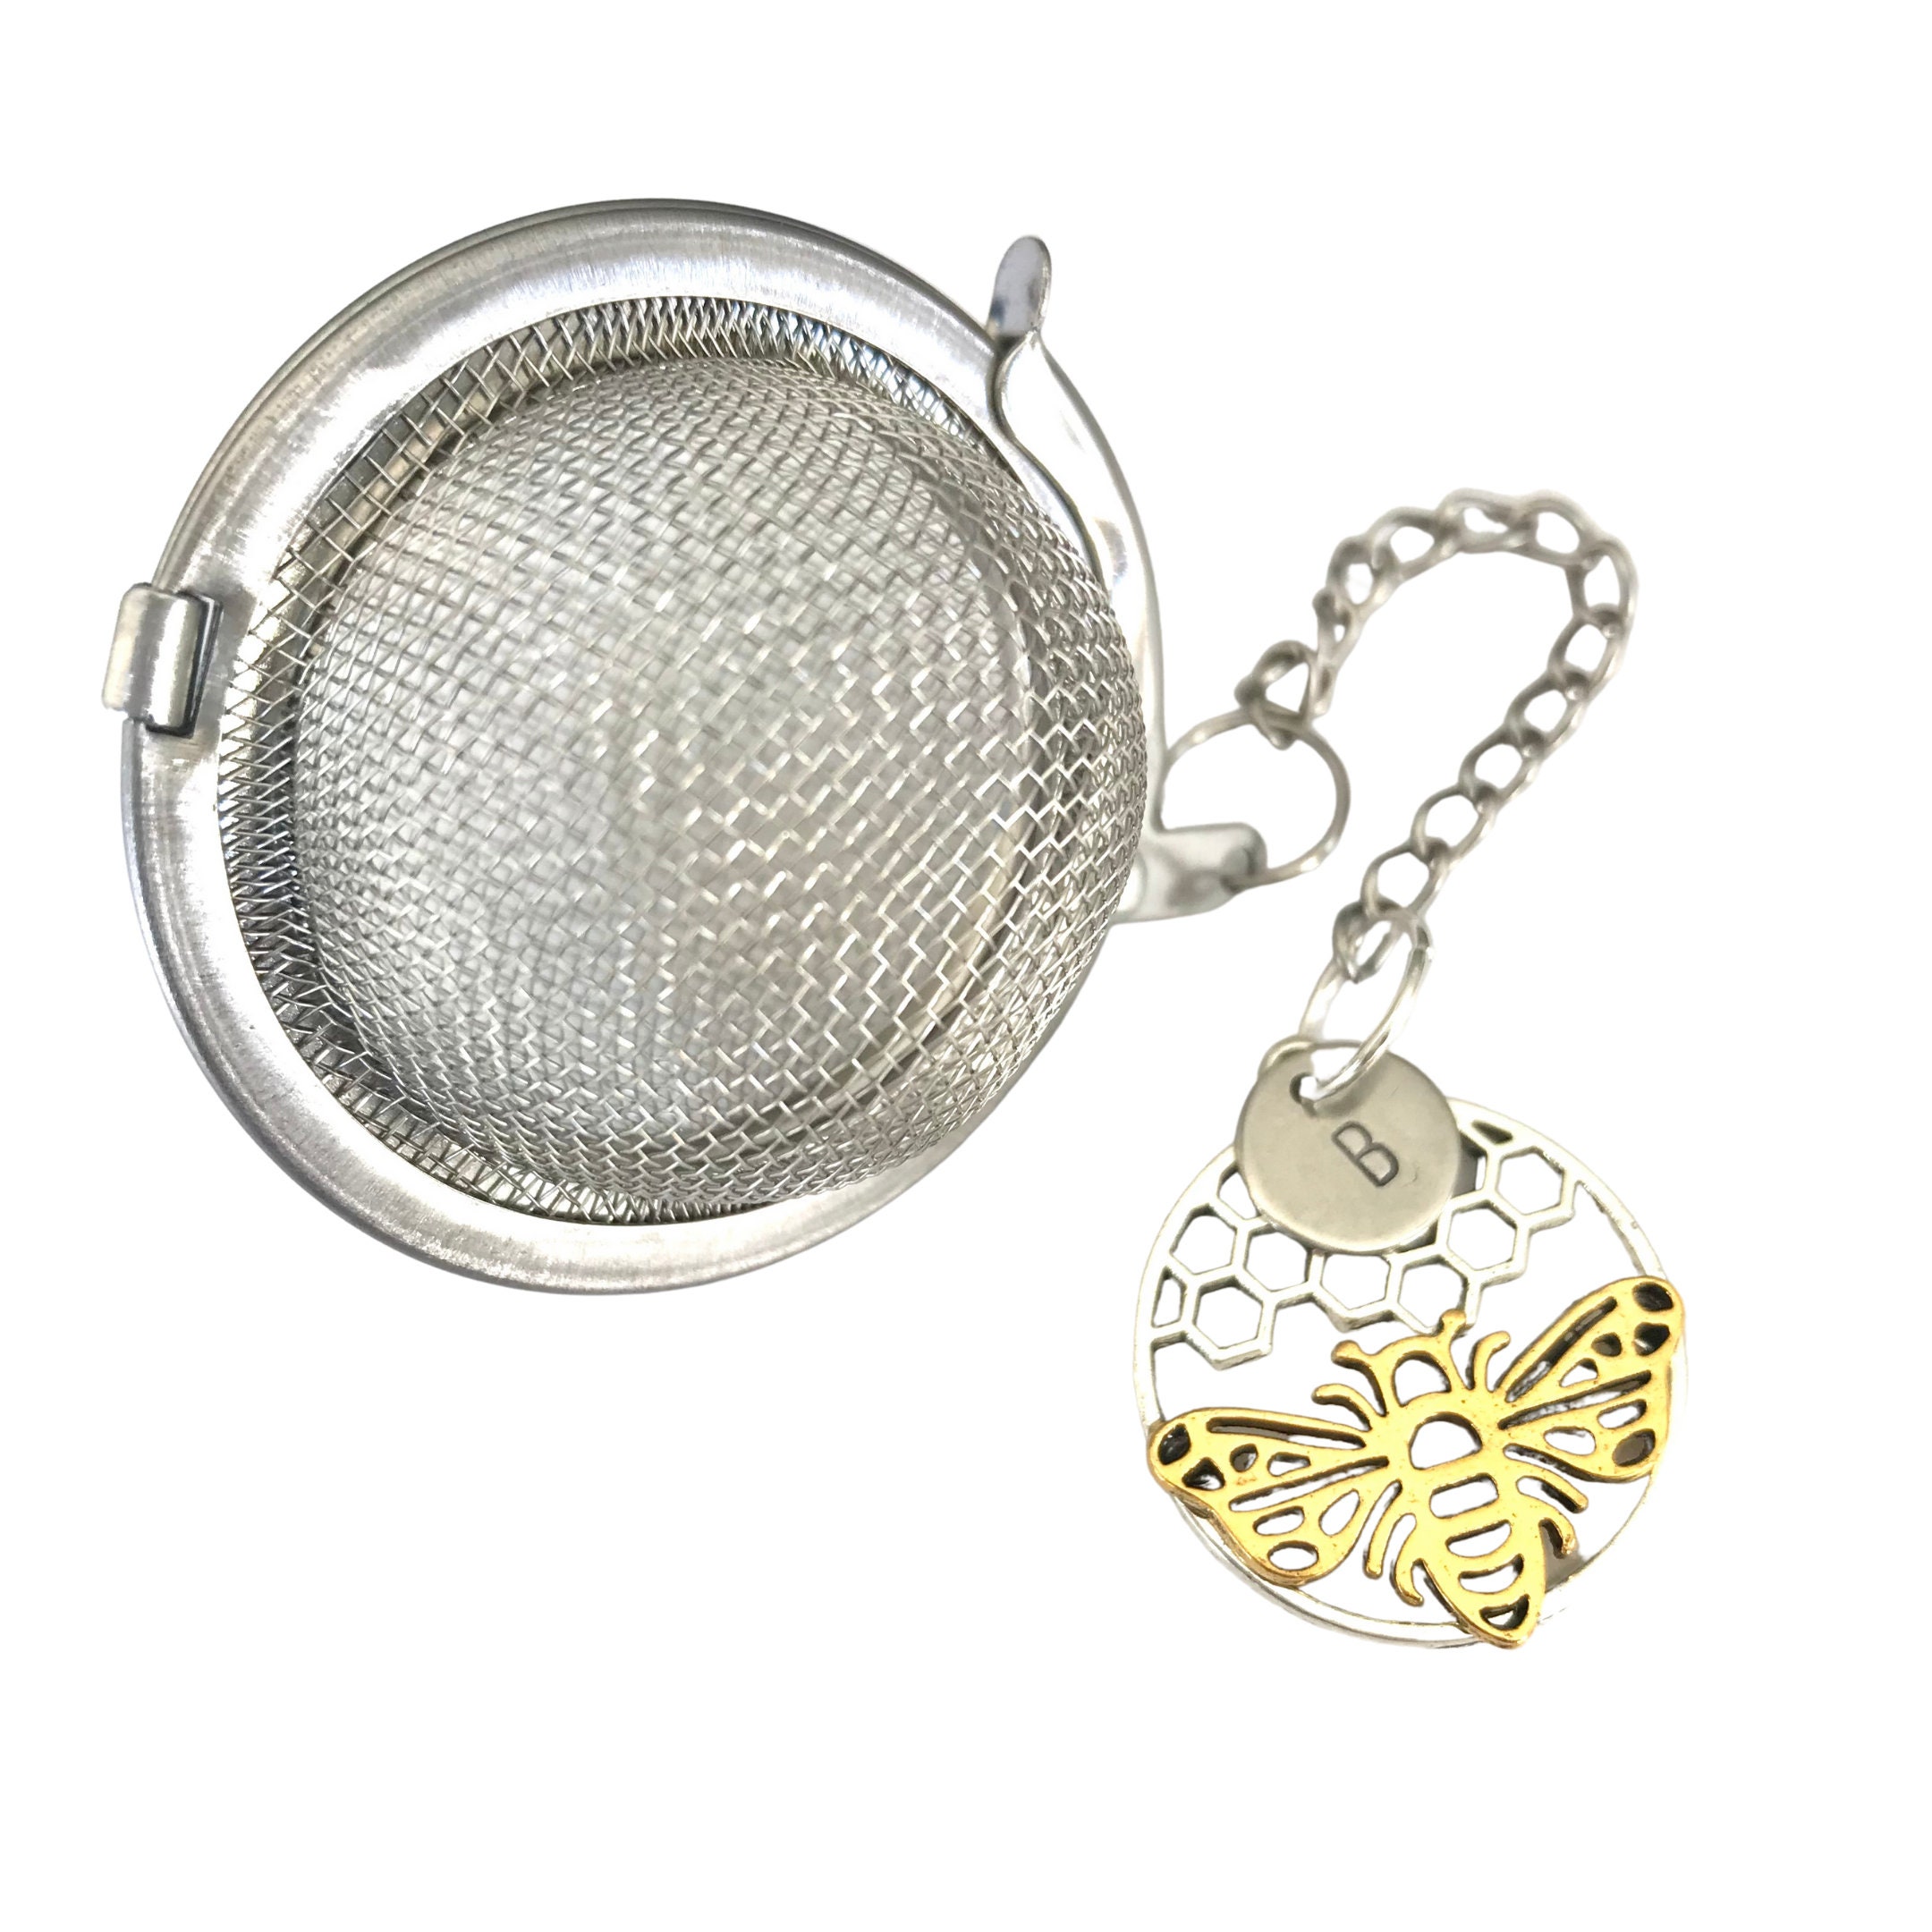 Tennis Tea Infuser, Tennis Racket Charms With Yellow Crystal Bead  Symbolizing Tennis Balls, Mesh Tea Strainer Hot Drink Accessories 